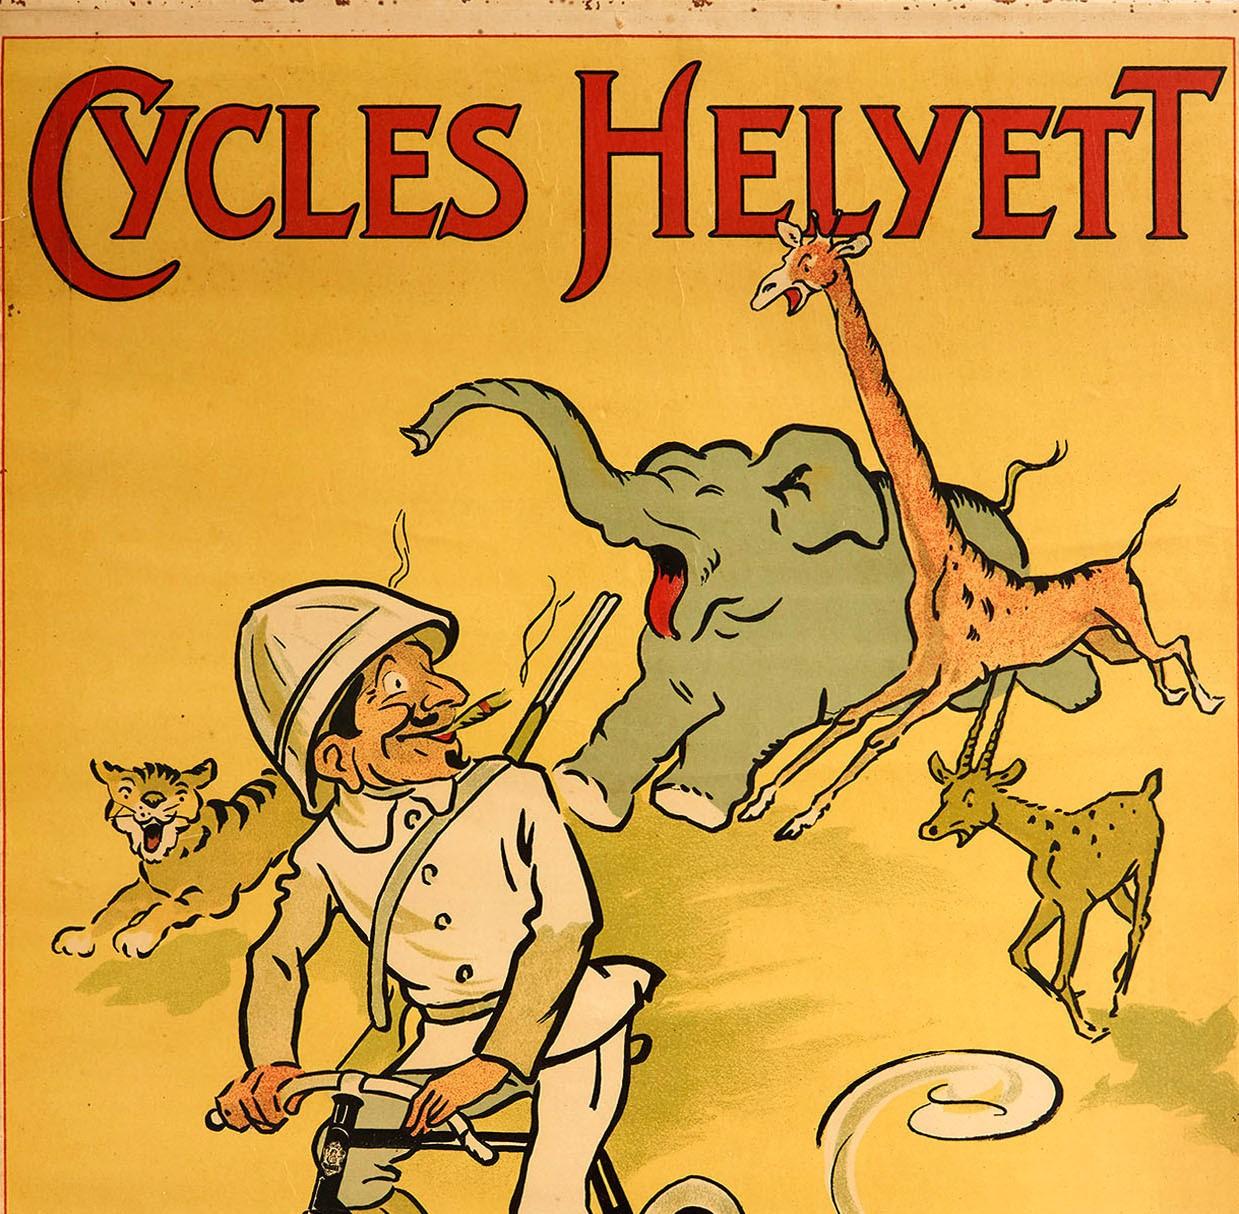 Original antique bicycle advertising poster for Cycles Helyett - Vous pouvez courir...! Sur ma bicyclette Helyett je ne vous crains pas...! You can run...! On my Helyett bicycle I do not fear you...! - featuring a fun and colorful design against a